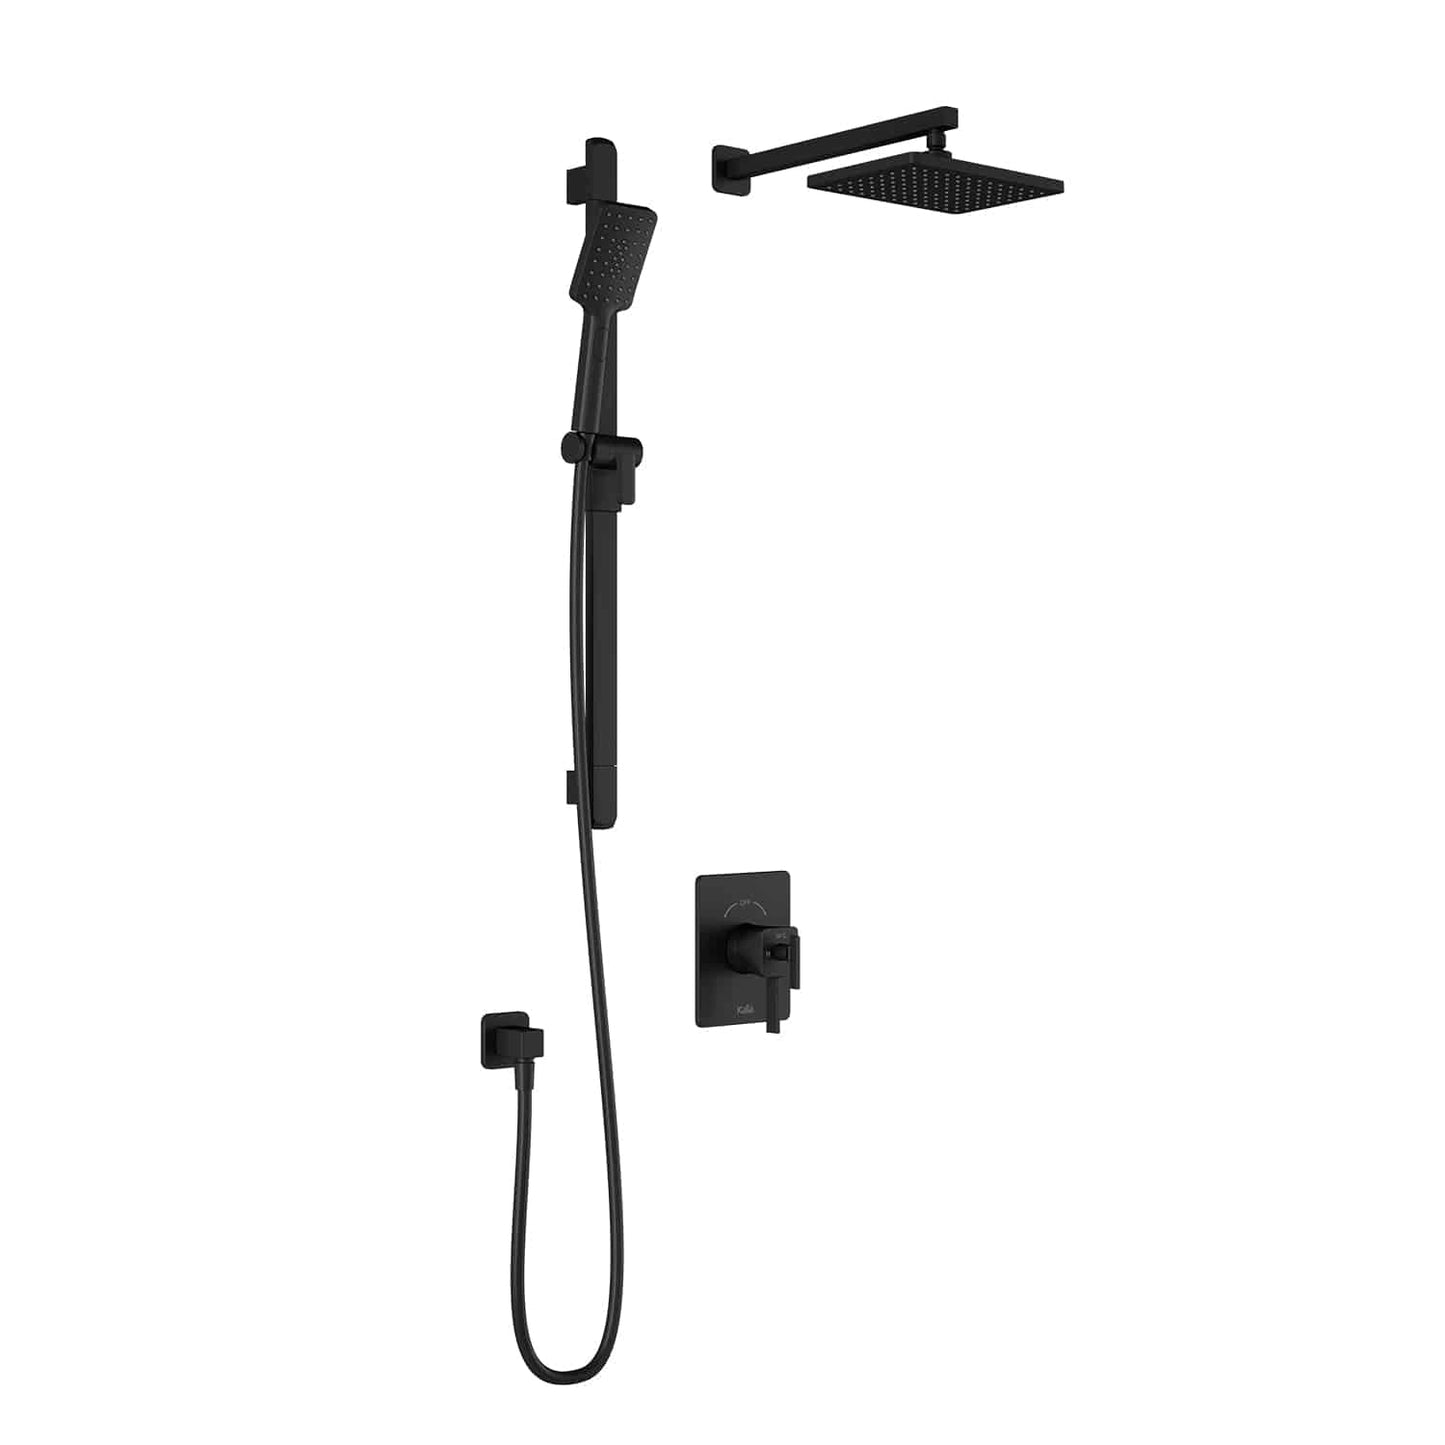 Kalia SquareOne TCD1 (Valve Not Included) AQUATONIK T/P Coaxial Shower System with Wall Arm- Matte Black